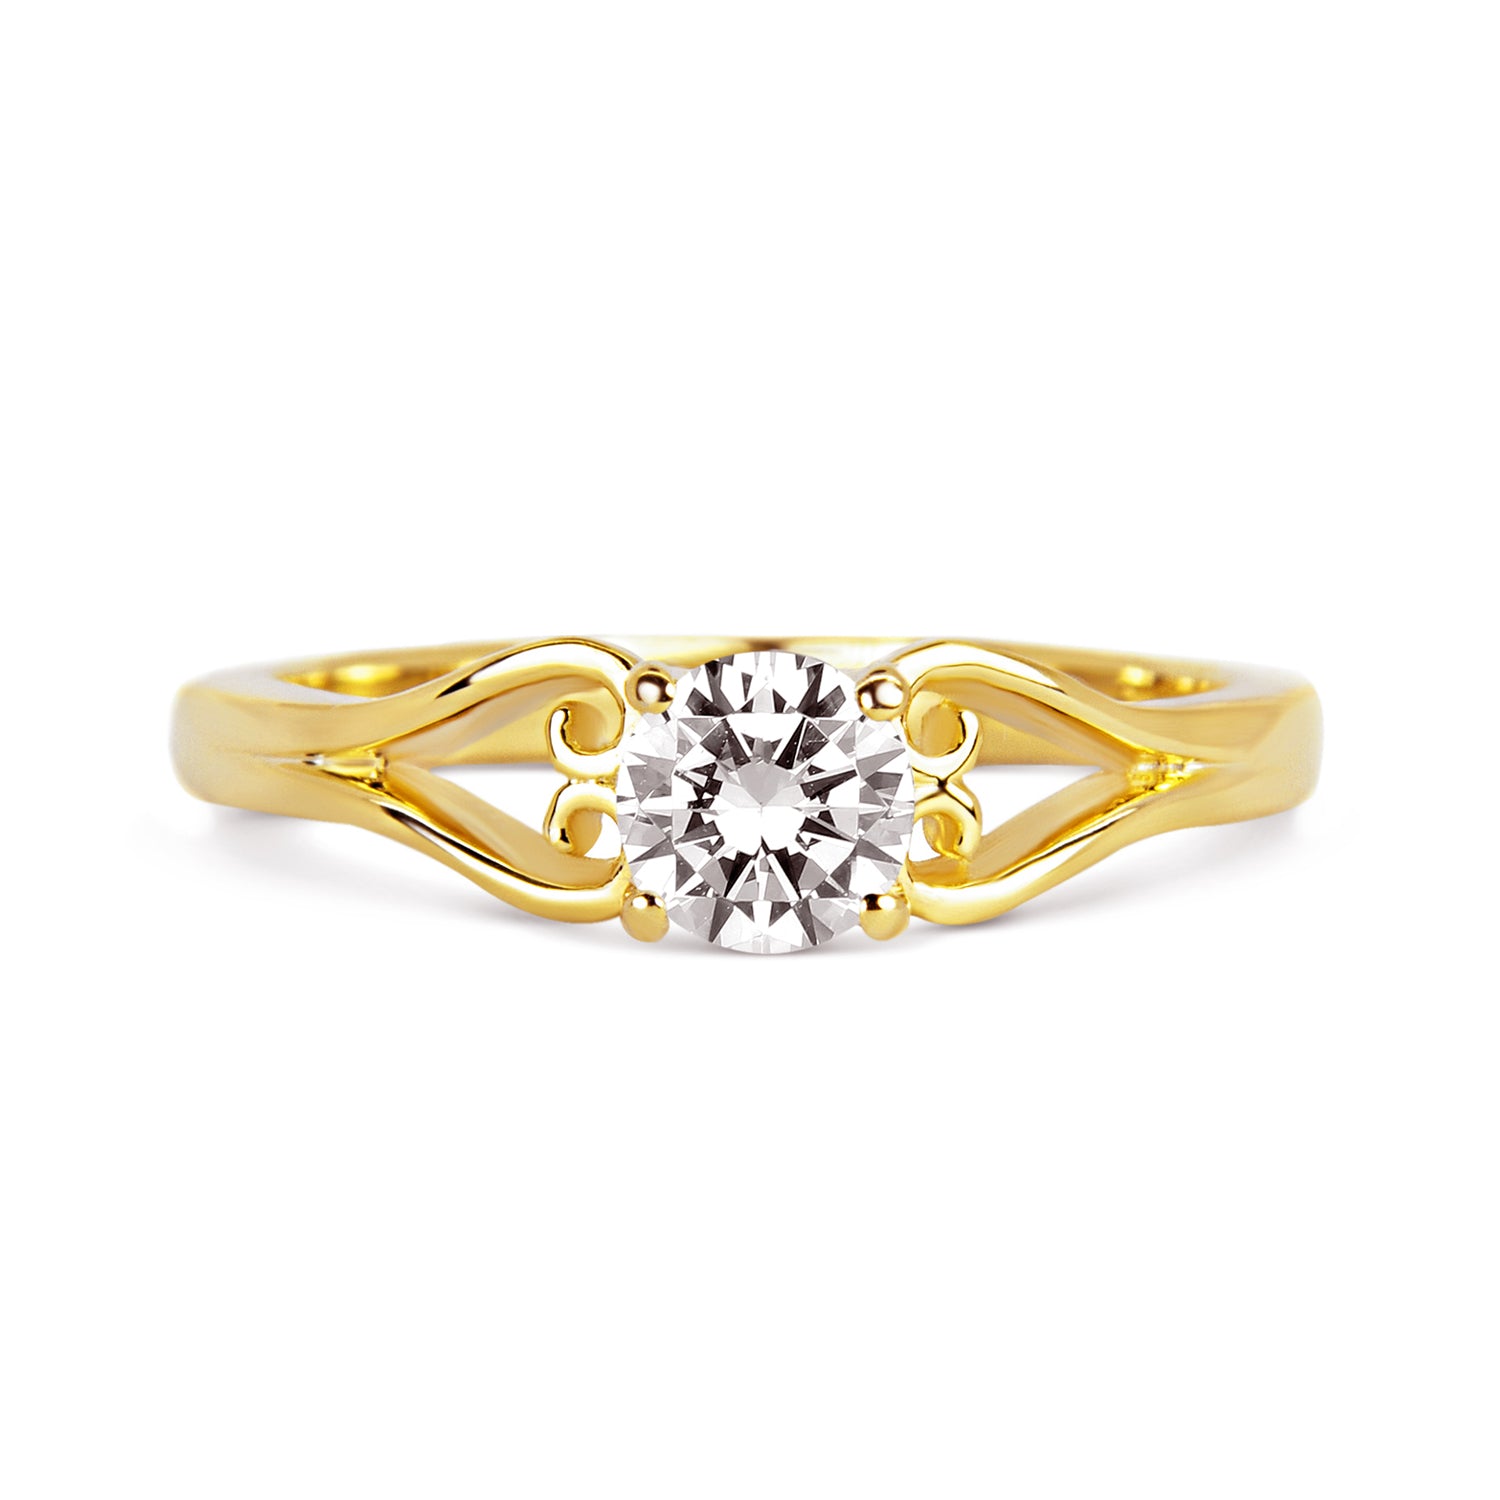 Introducing The Venice Collection, exquisite ethical engagement rings by award-winning jeweller, Arabel Lebrusan